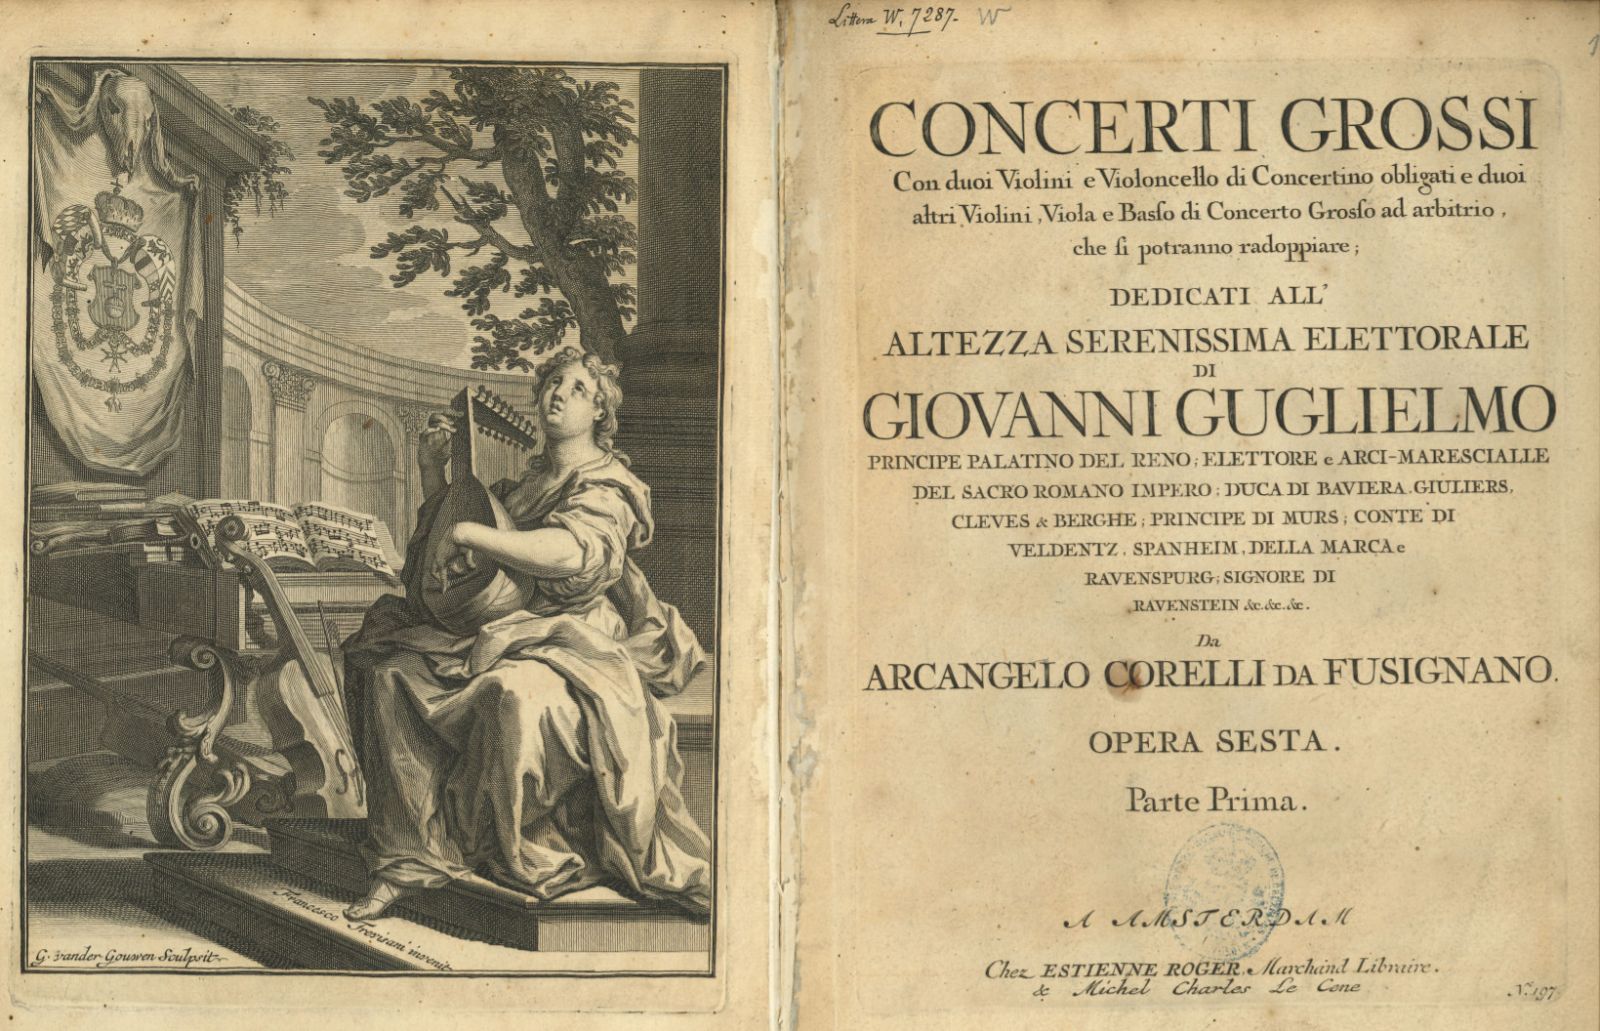 Concerti grossi, opus 6 by Arcangelo Corelli (1653-1713), published by Roger and Le Cene in Amsterdam, ca. 1719. The frontispiece is only printed in the first violin part. B-Bc 7287.